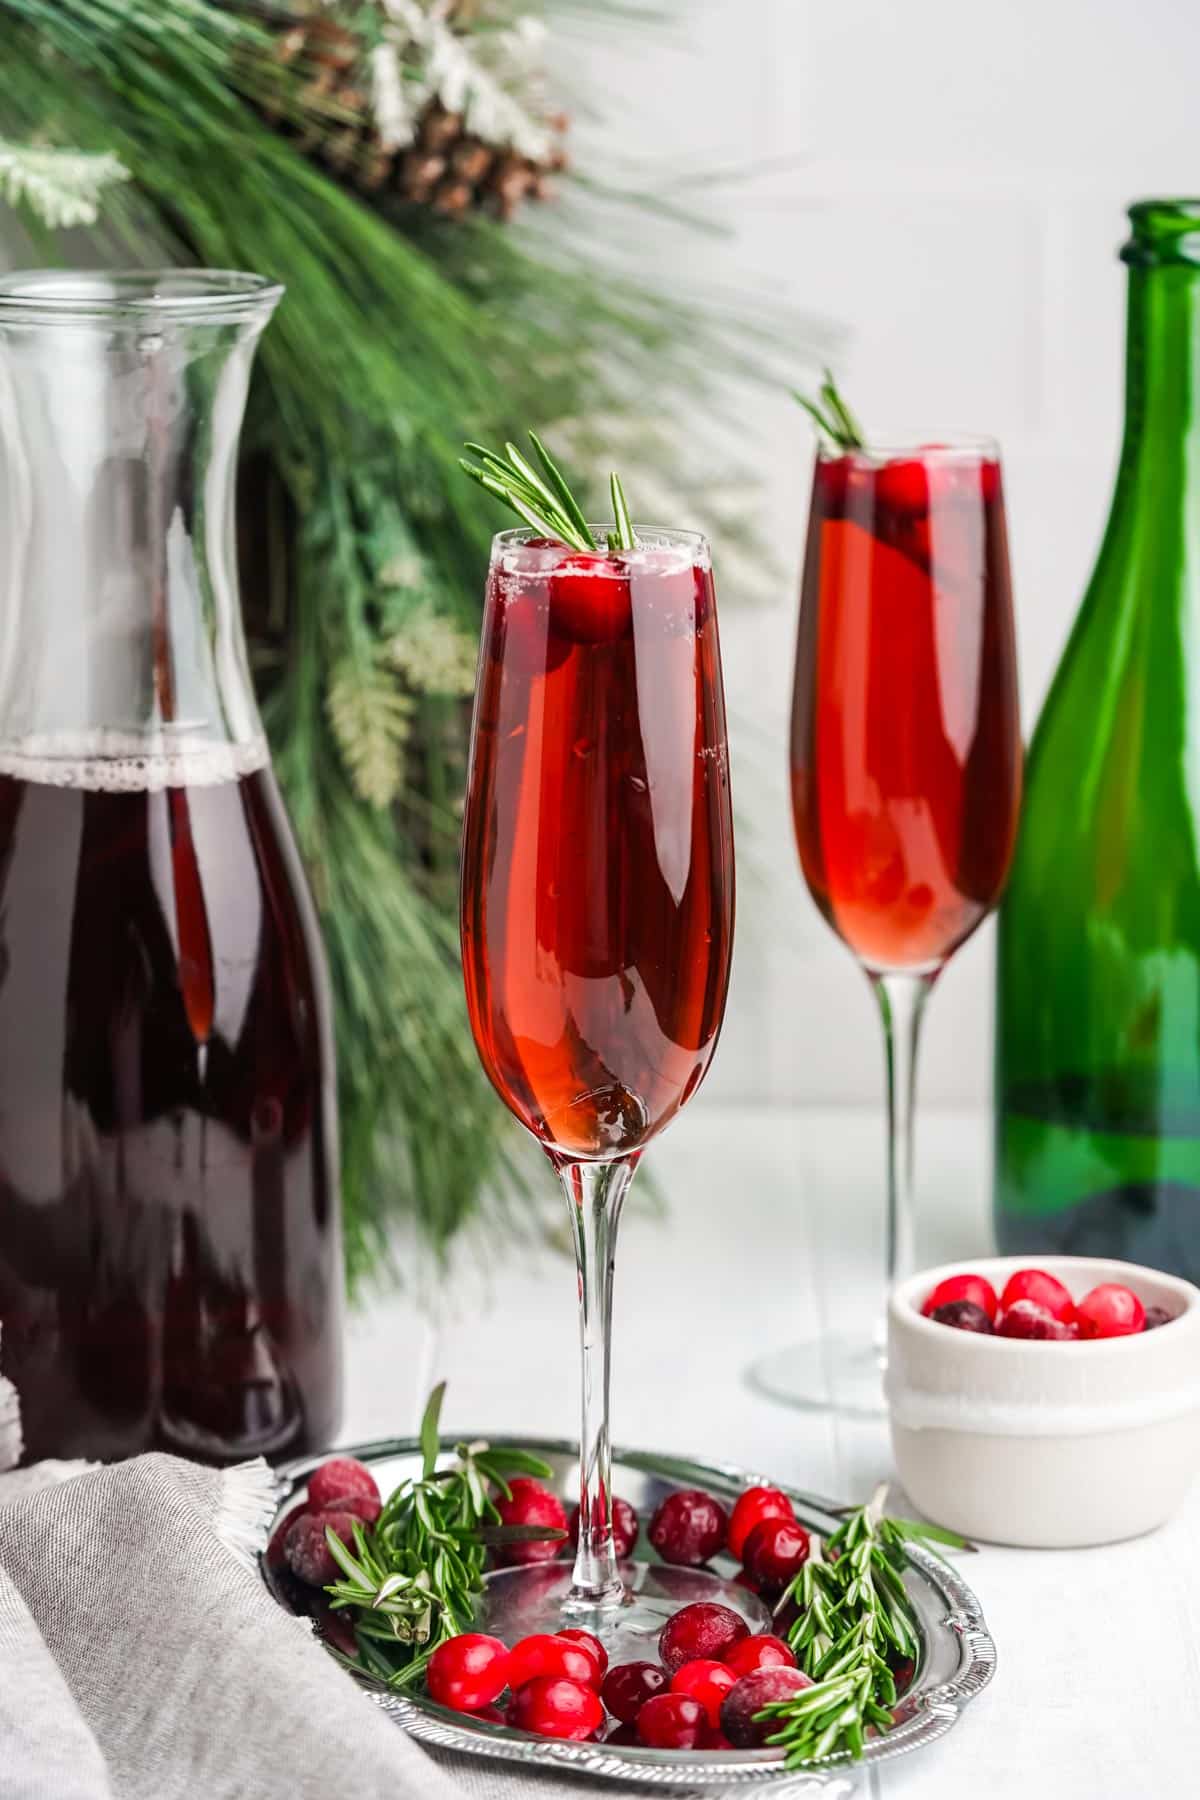 thanksgiving friendsgiving drink ideas and cranberry mimosa recipes that your friends will love.